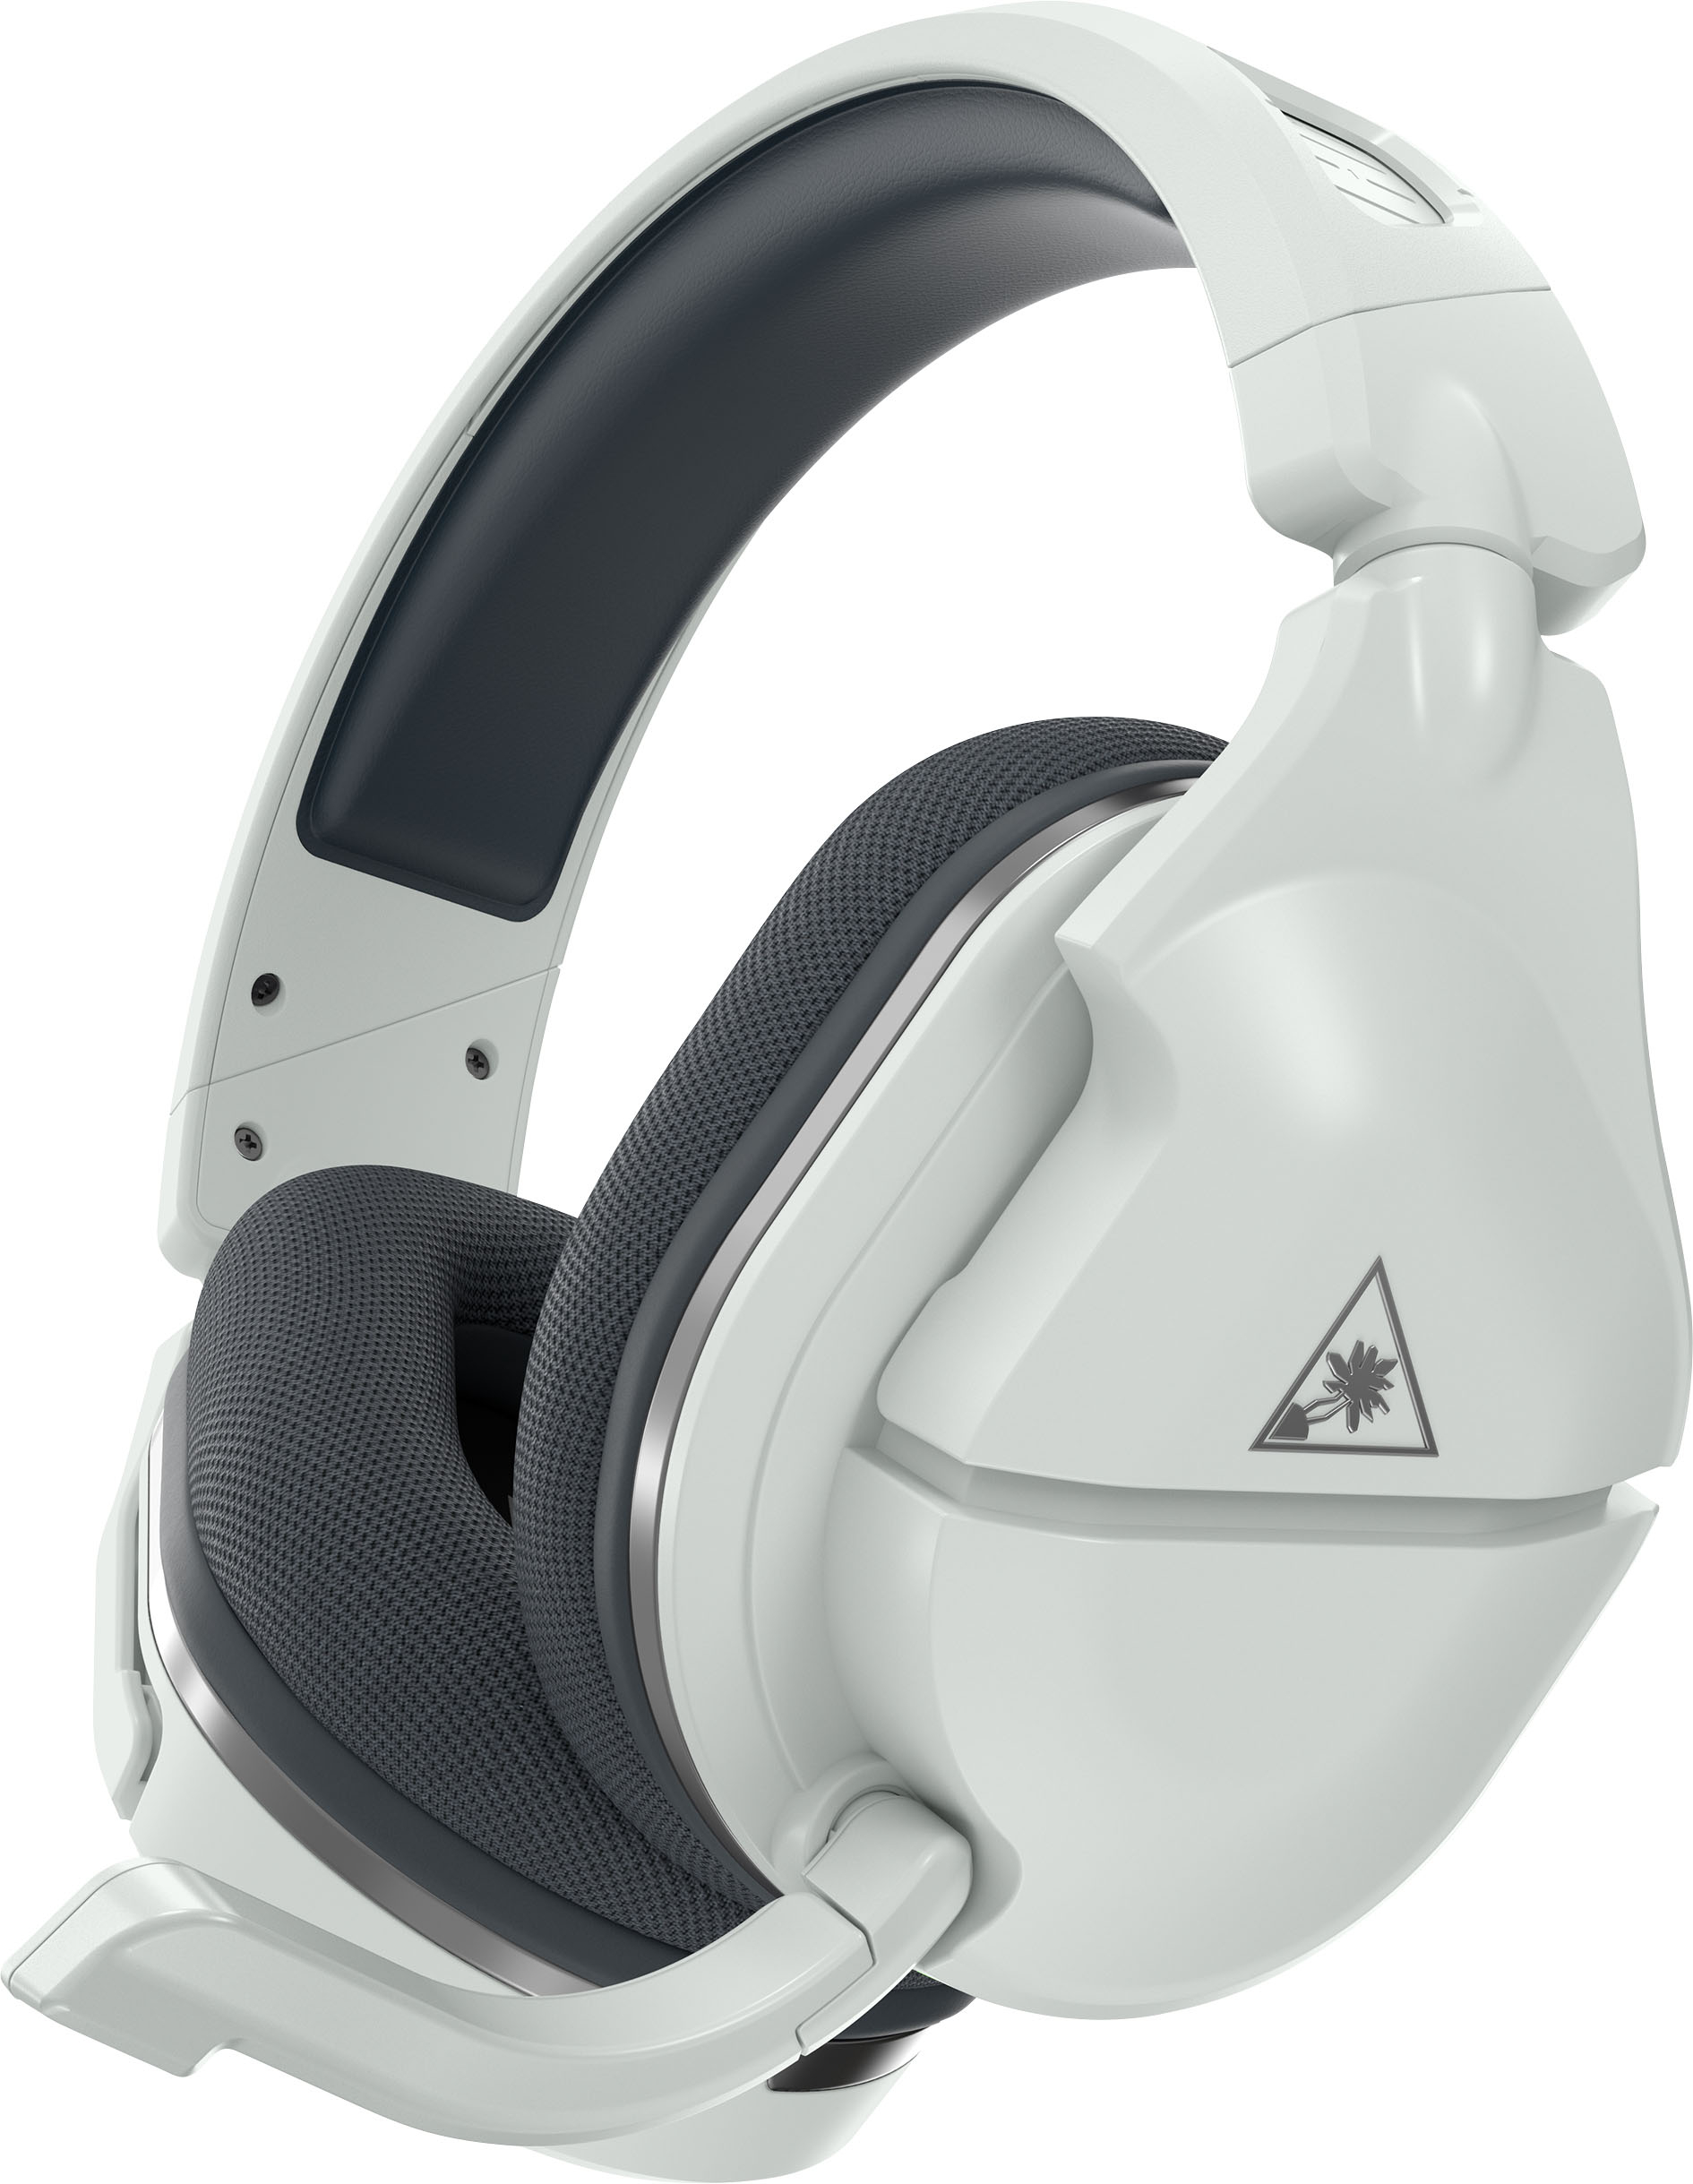 Turtle Beach Stealth 600 Gen 2 Usb Wireless Amplified Gaming Headset For Xbox Series X Xbox Series S Xbox One 24 Hour Battery White Silver Tbs 2374 01 Best Buy